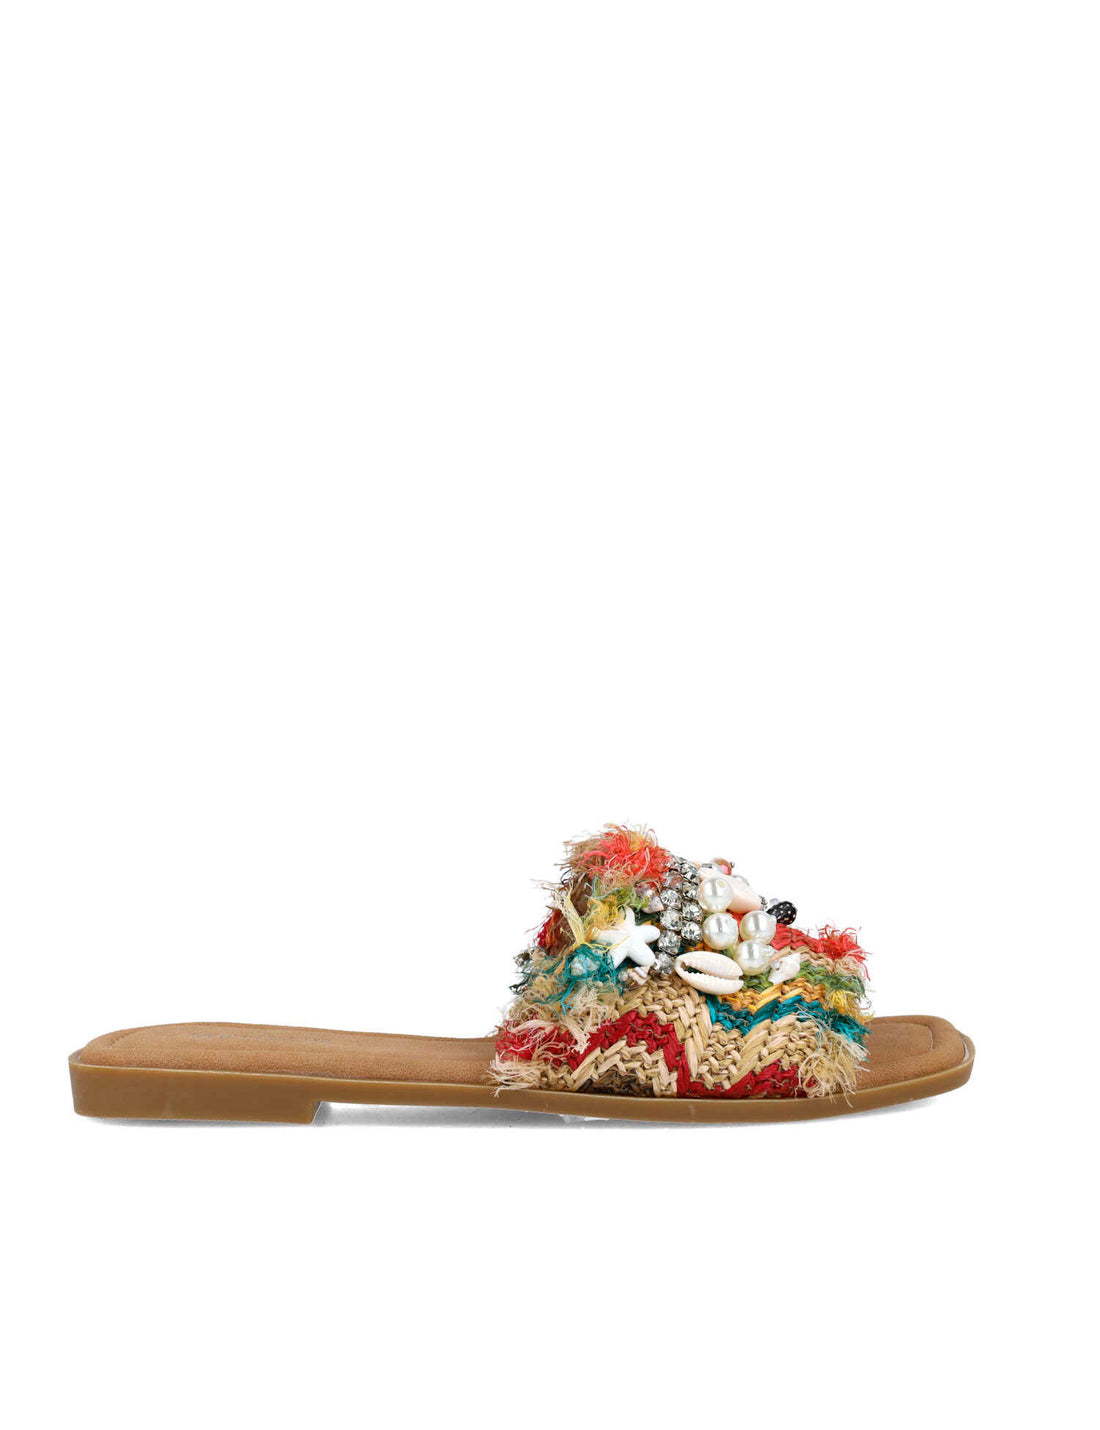 Multi-Color Slippers With Embellishments_25386_22_01